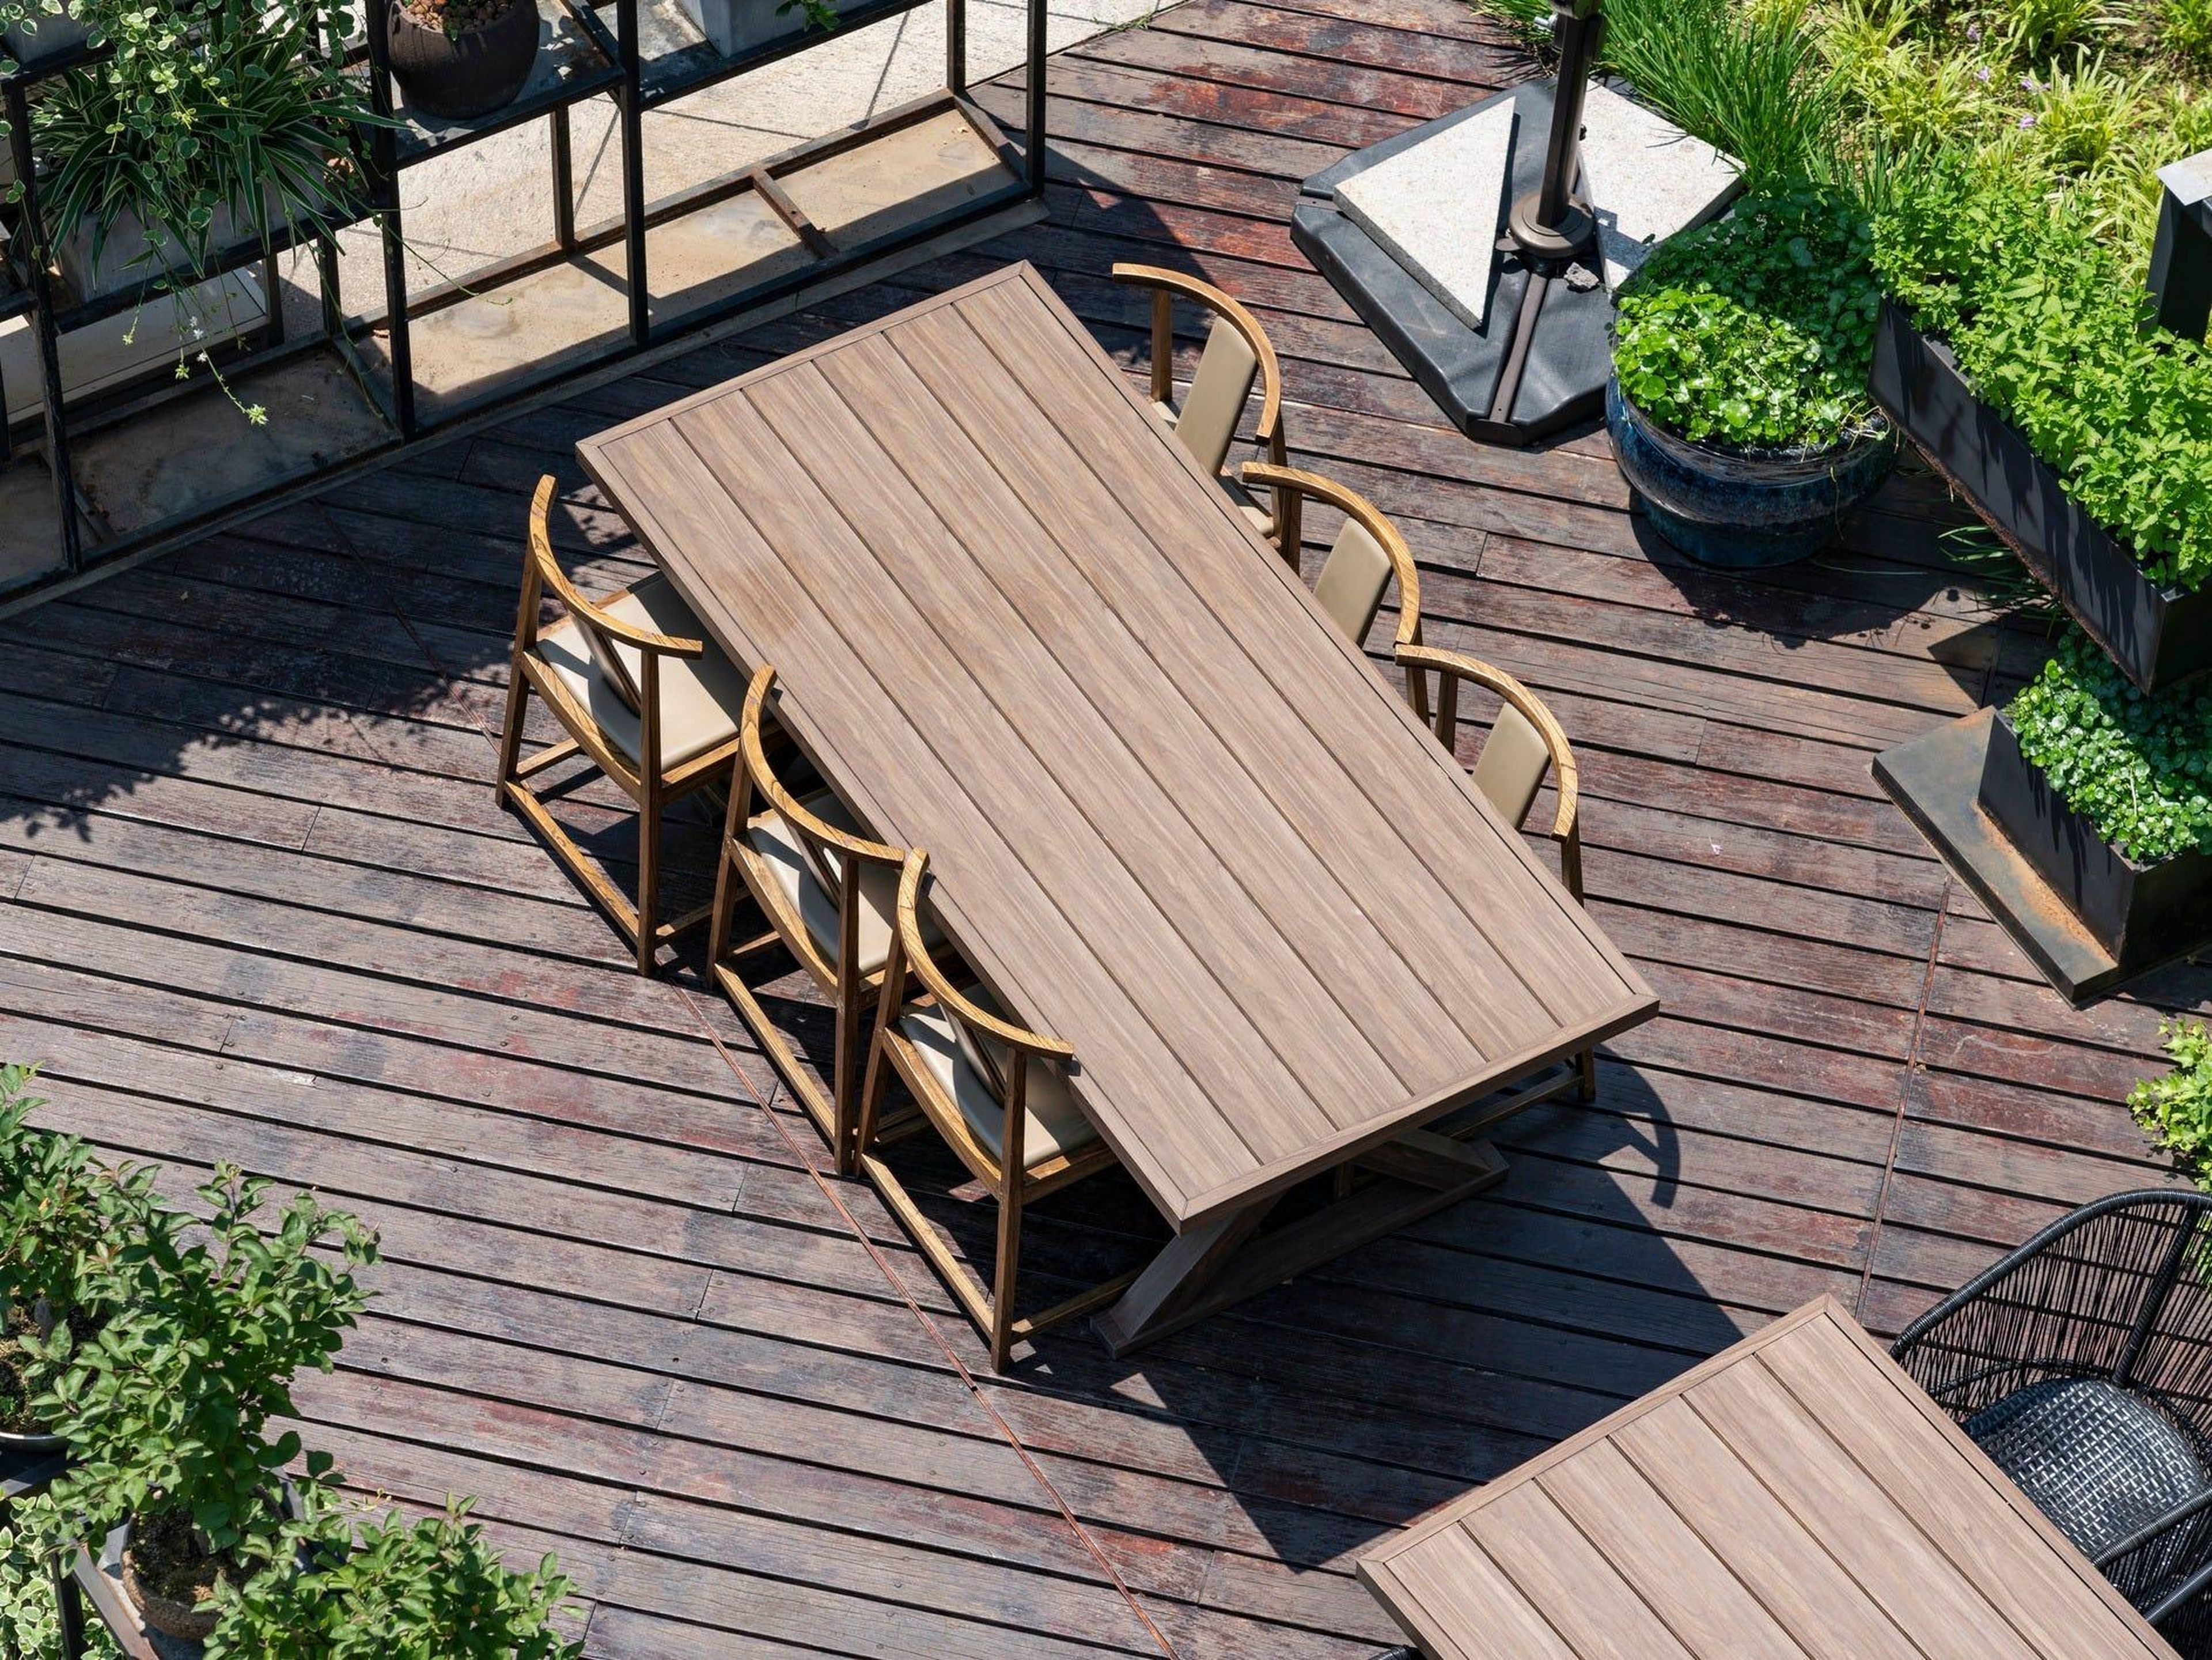 2. A greater focus on outdoor space